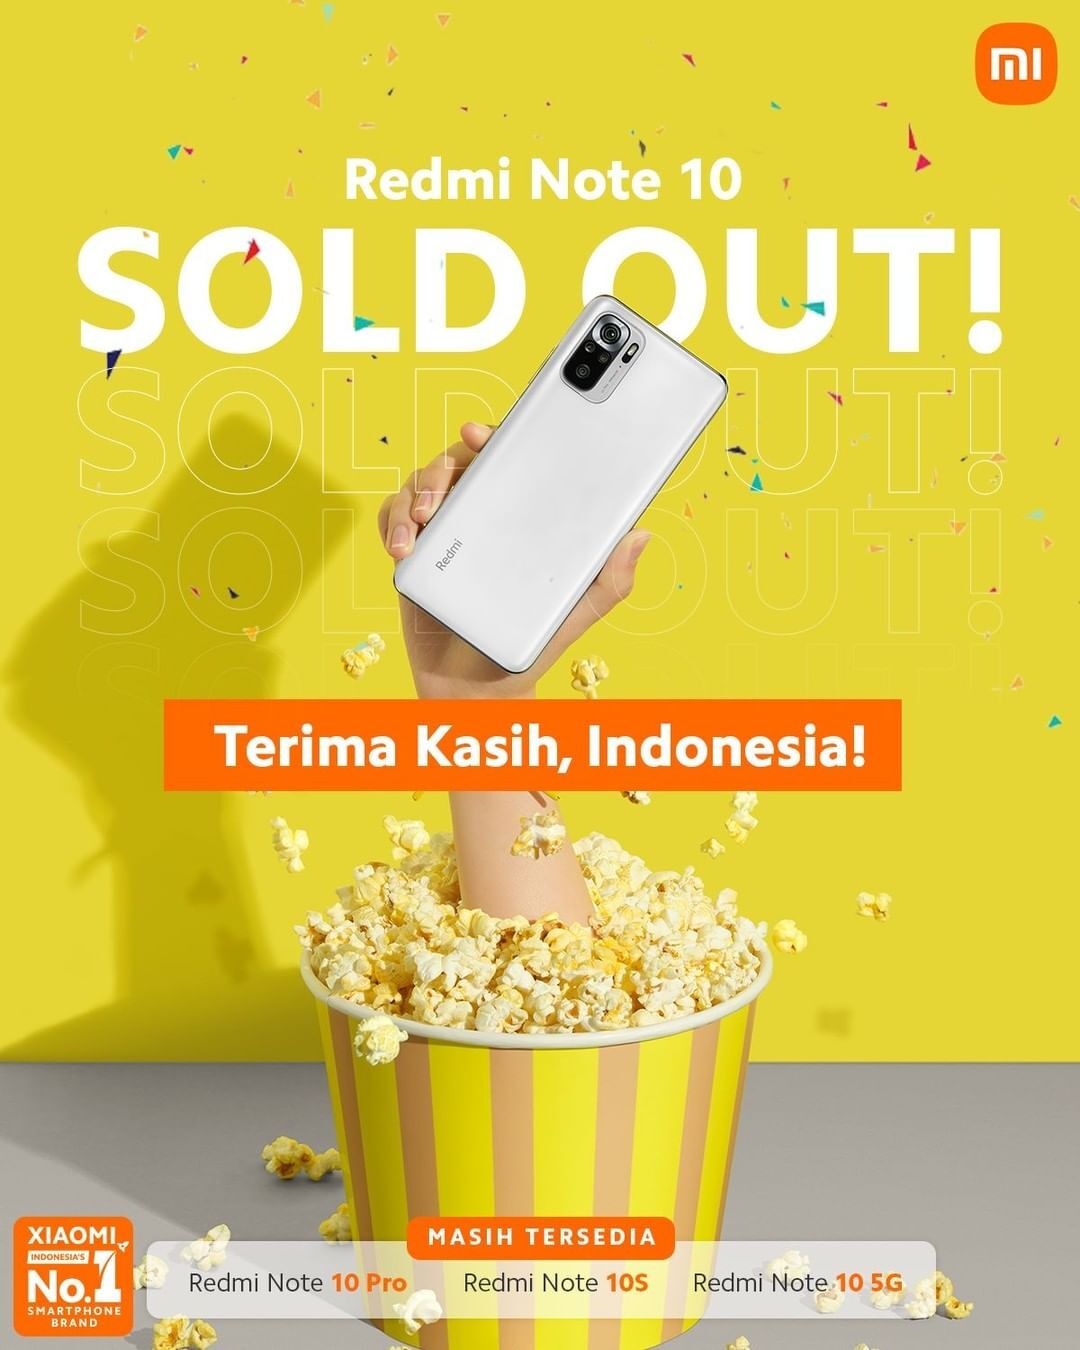 Xiaomi Indonesia's Instagram post about the Redmi Note 10 being sold out - Redmi Note 10 production on a pause; Chip shortages finally affecting Xiaomi